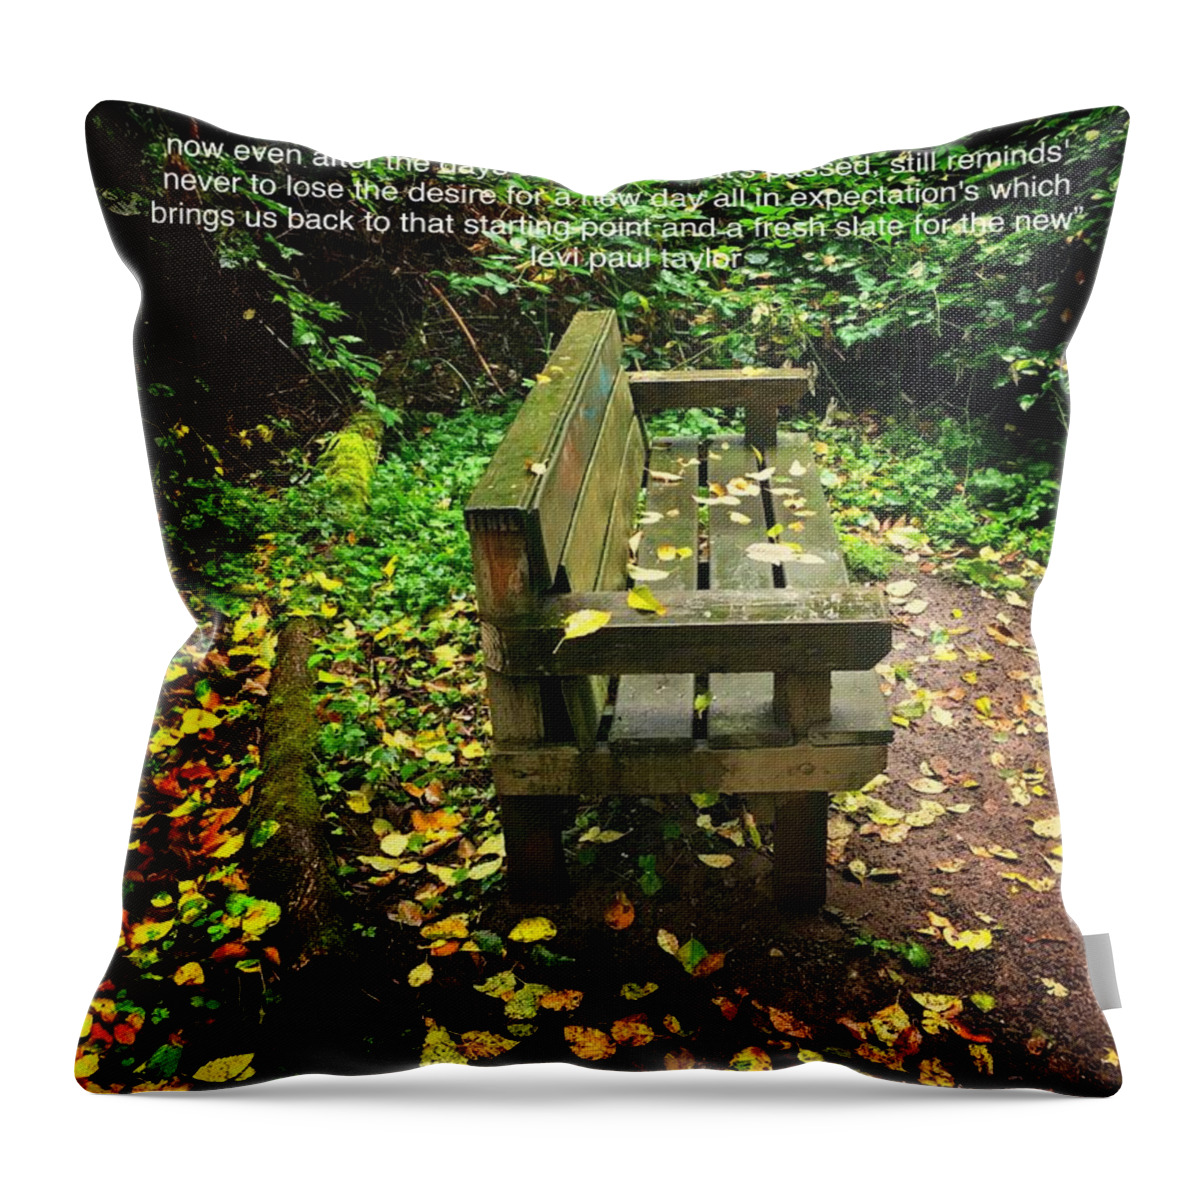  Throw Pillow featuring the photograph Moving Forward Motivational Quote by Jerry Abbott